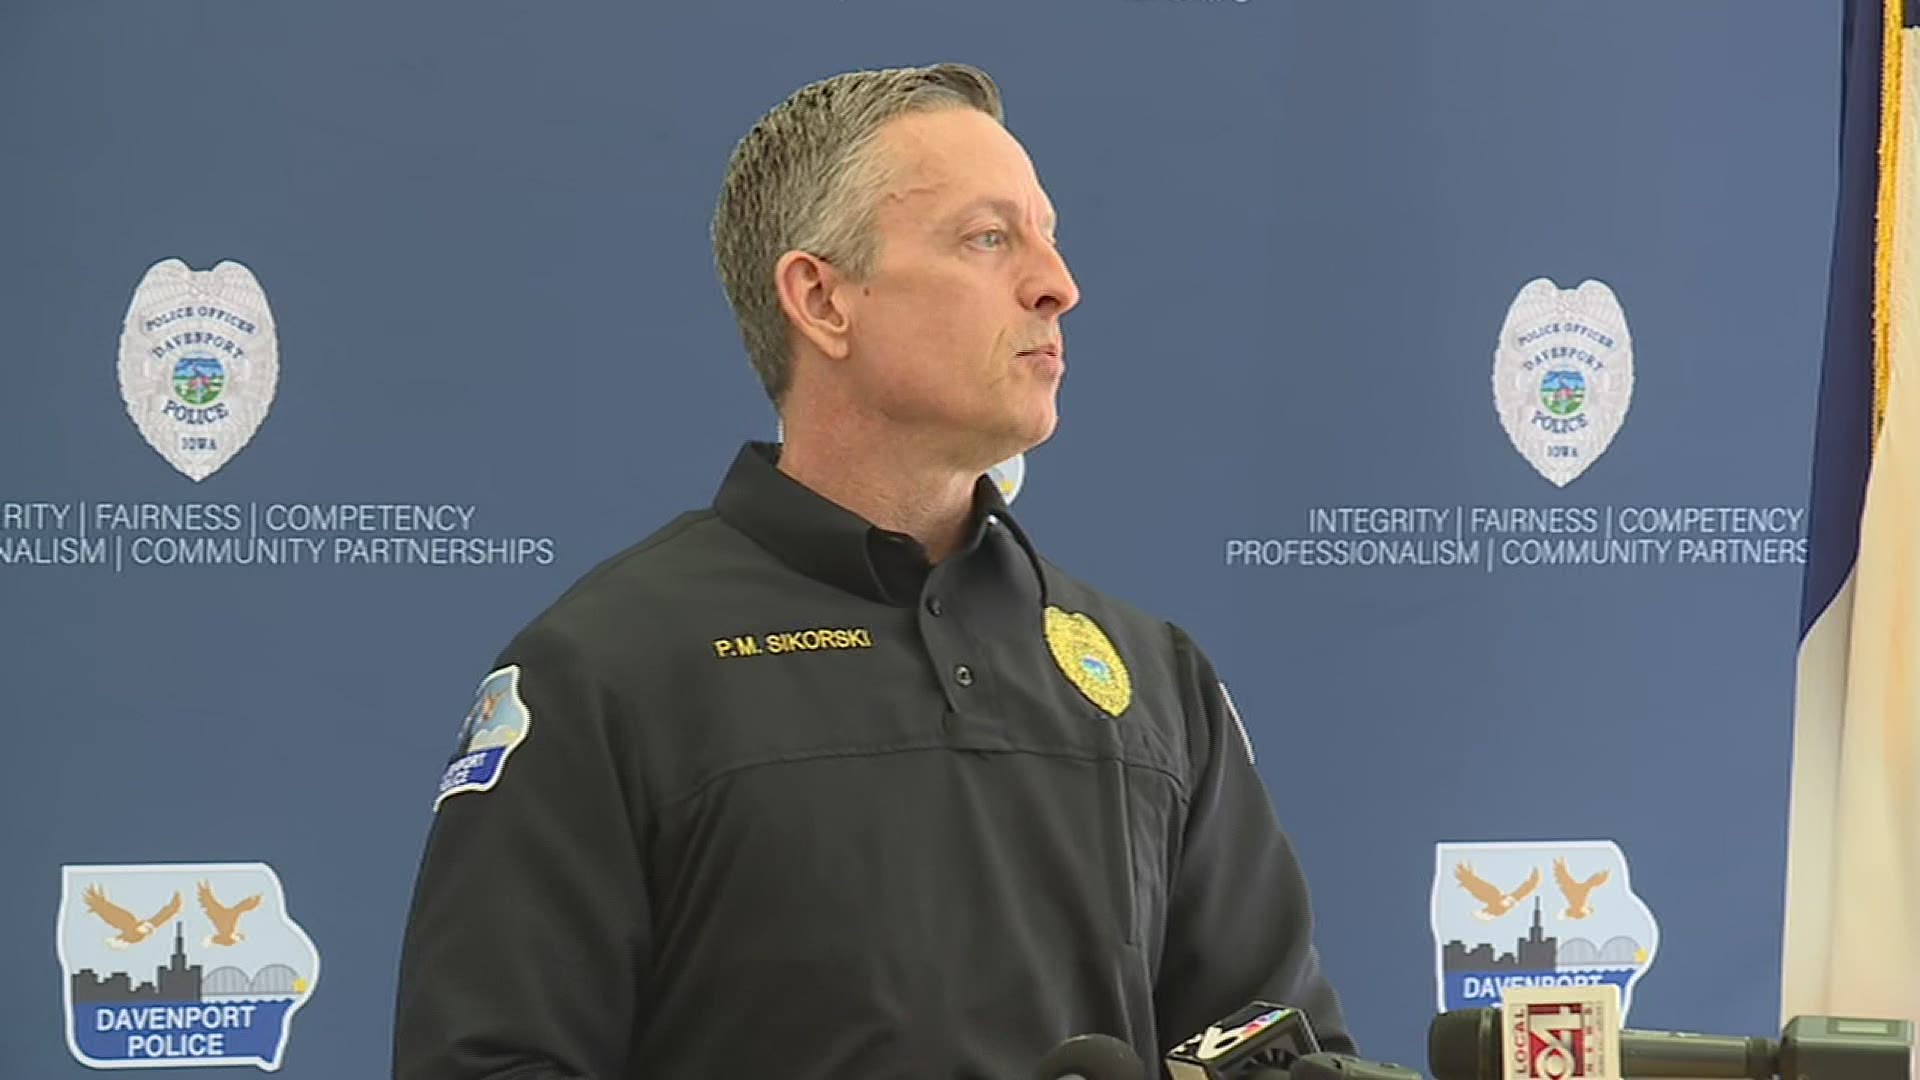 Chief Sikorski spoke on the homicide involving a 14-year-old boy.